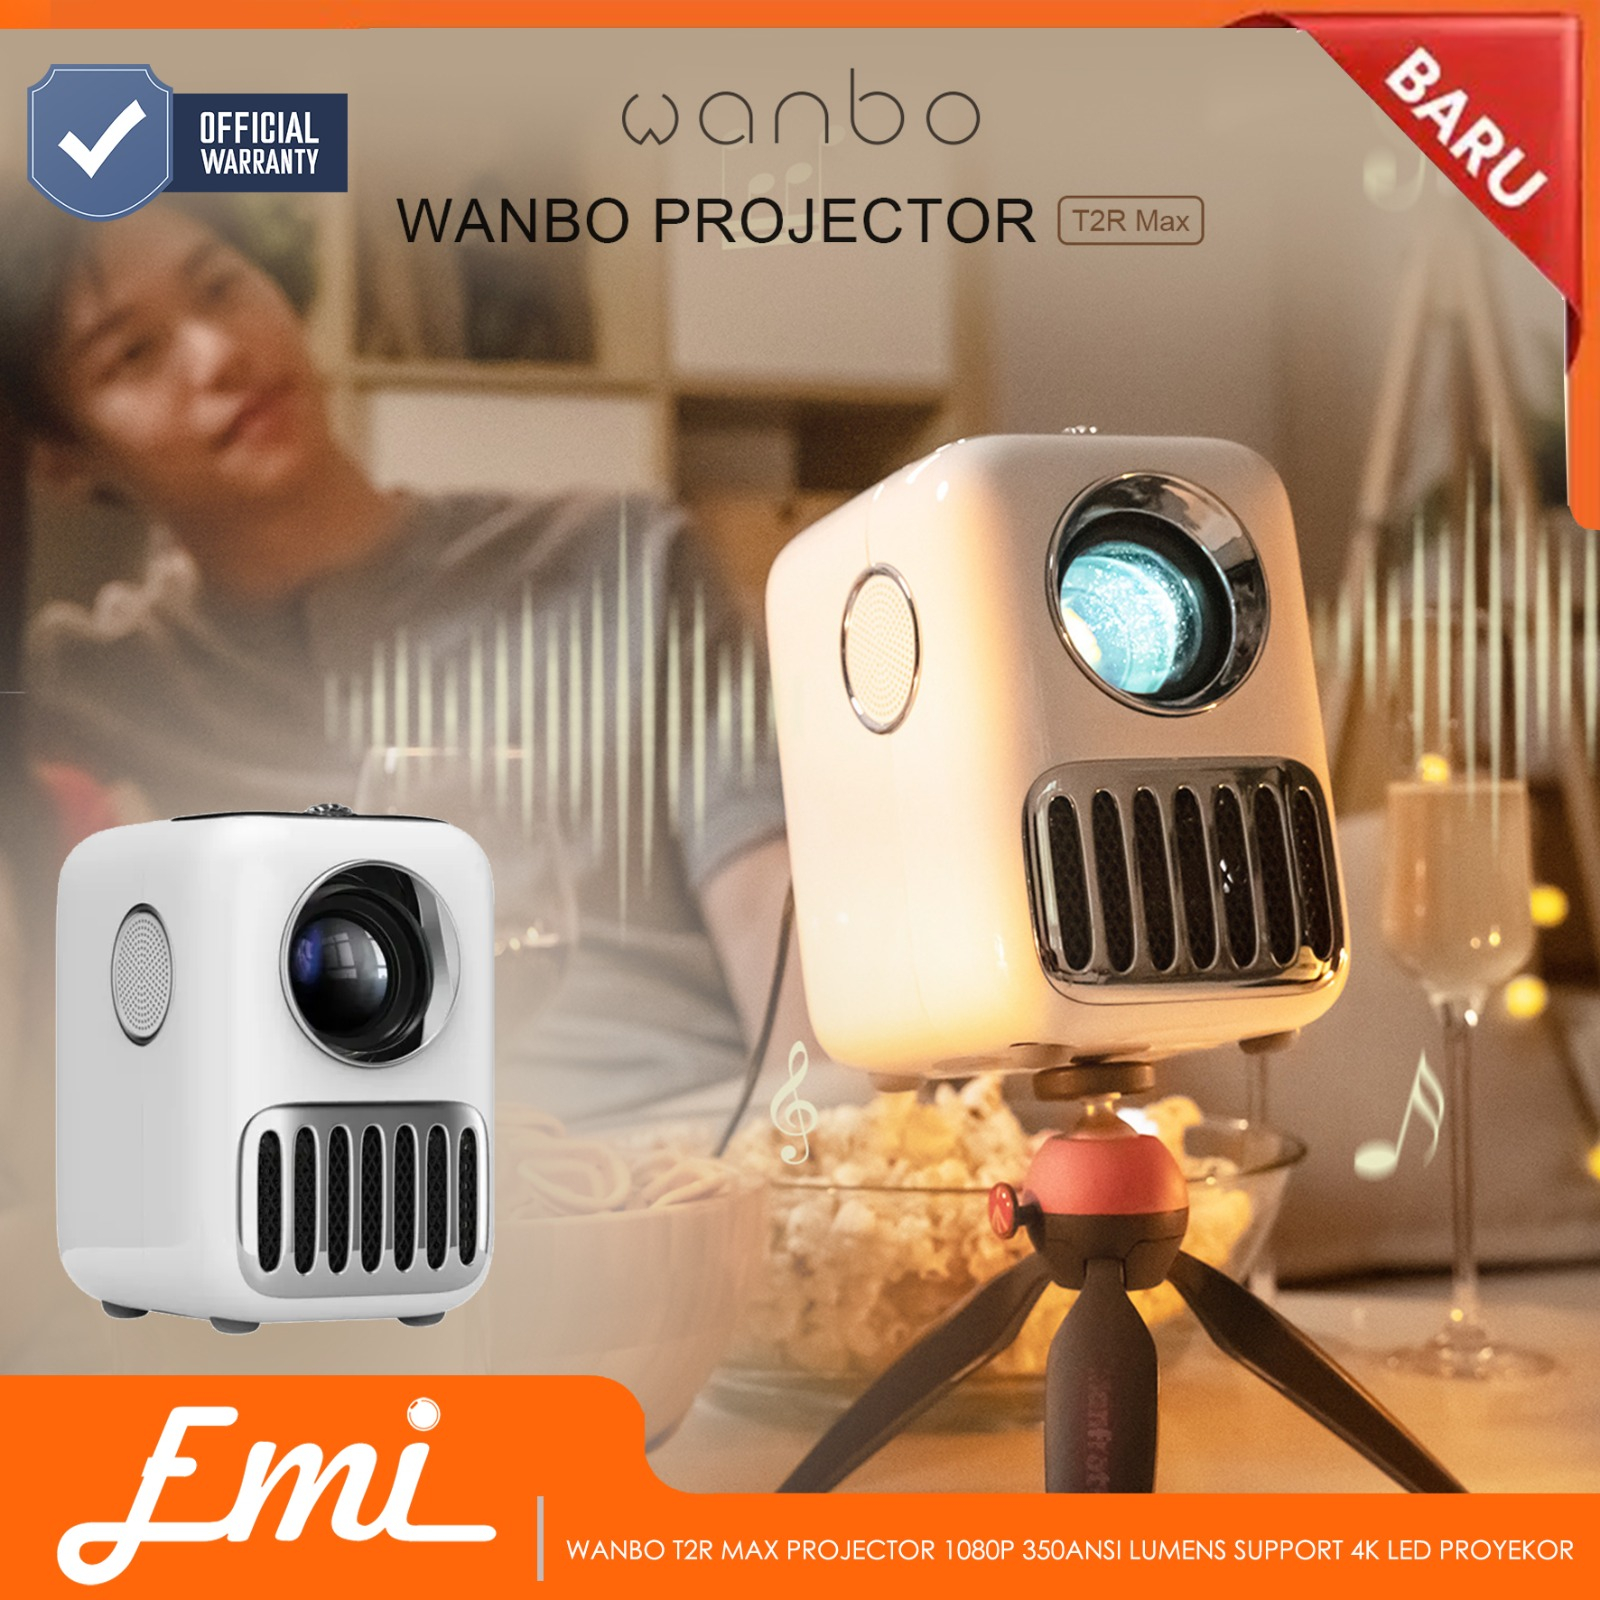 Wanbo T2R Max Android Projector 1080P 350ANSI Lumens Support 4K LED